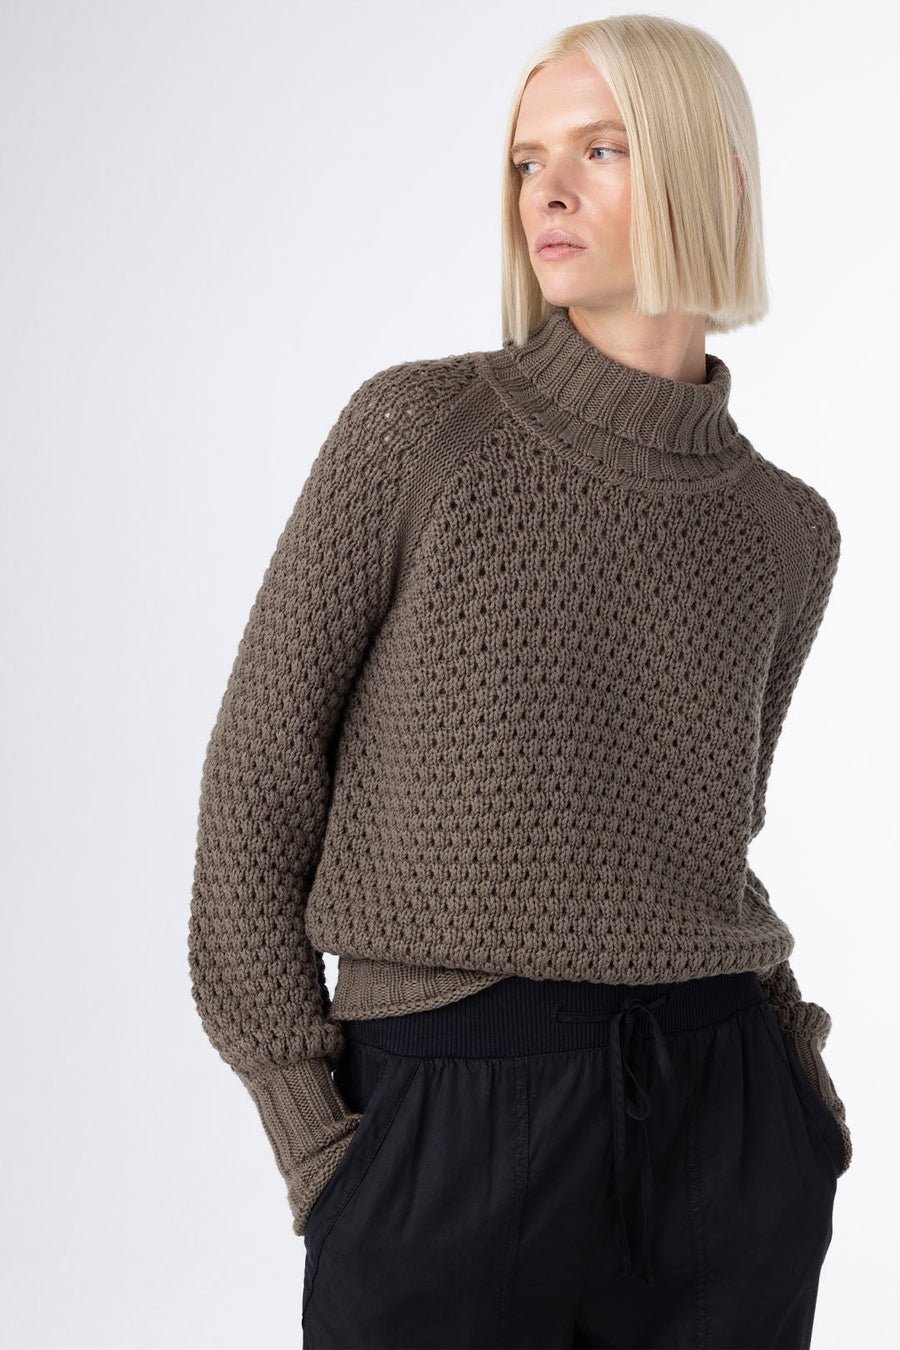 HONEYCOMB CROPPED TURTLENECK SWEATER, CYPRESS - Burning Torch Online Boutique